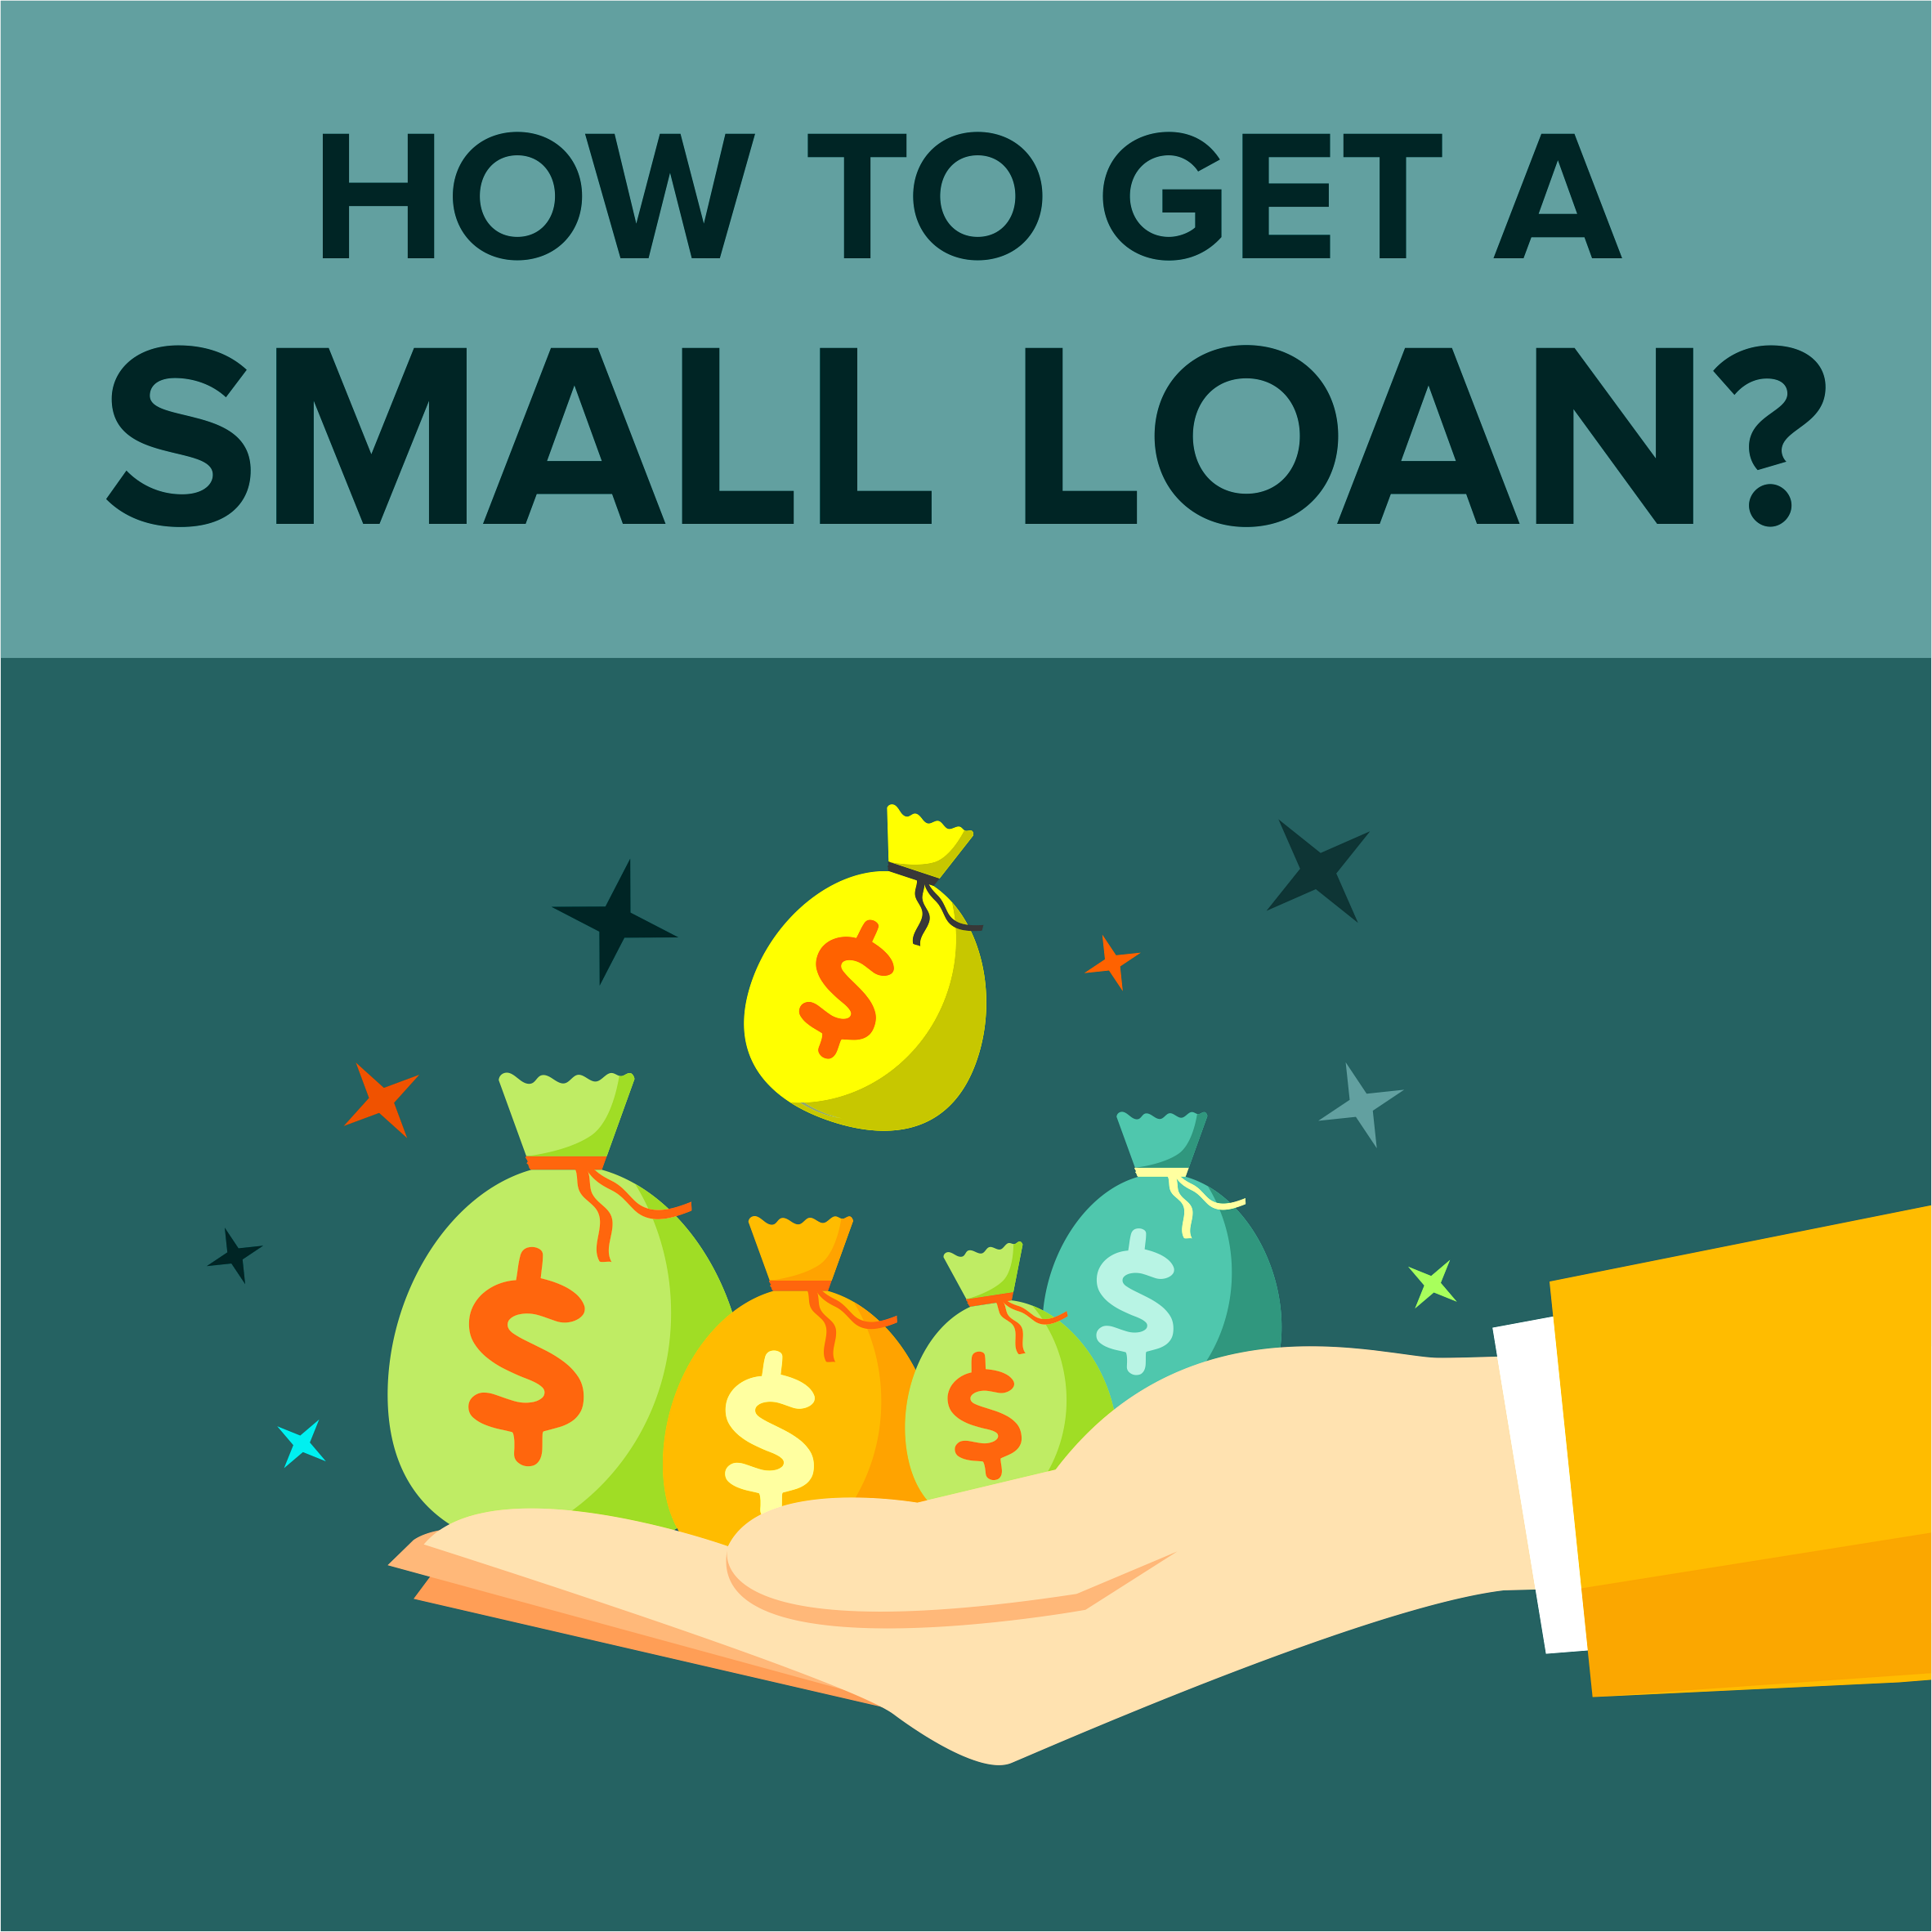 How to Get a Small Loan